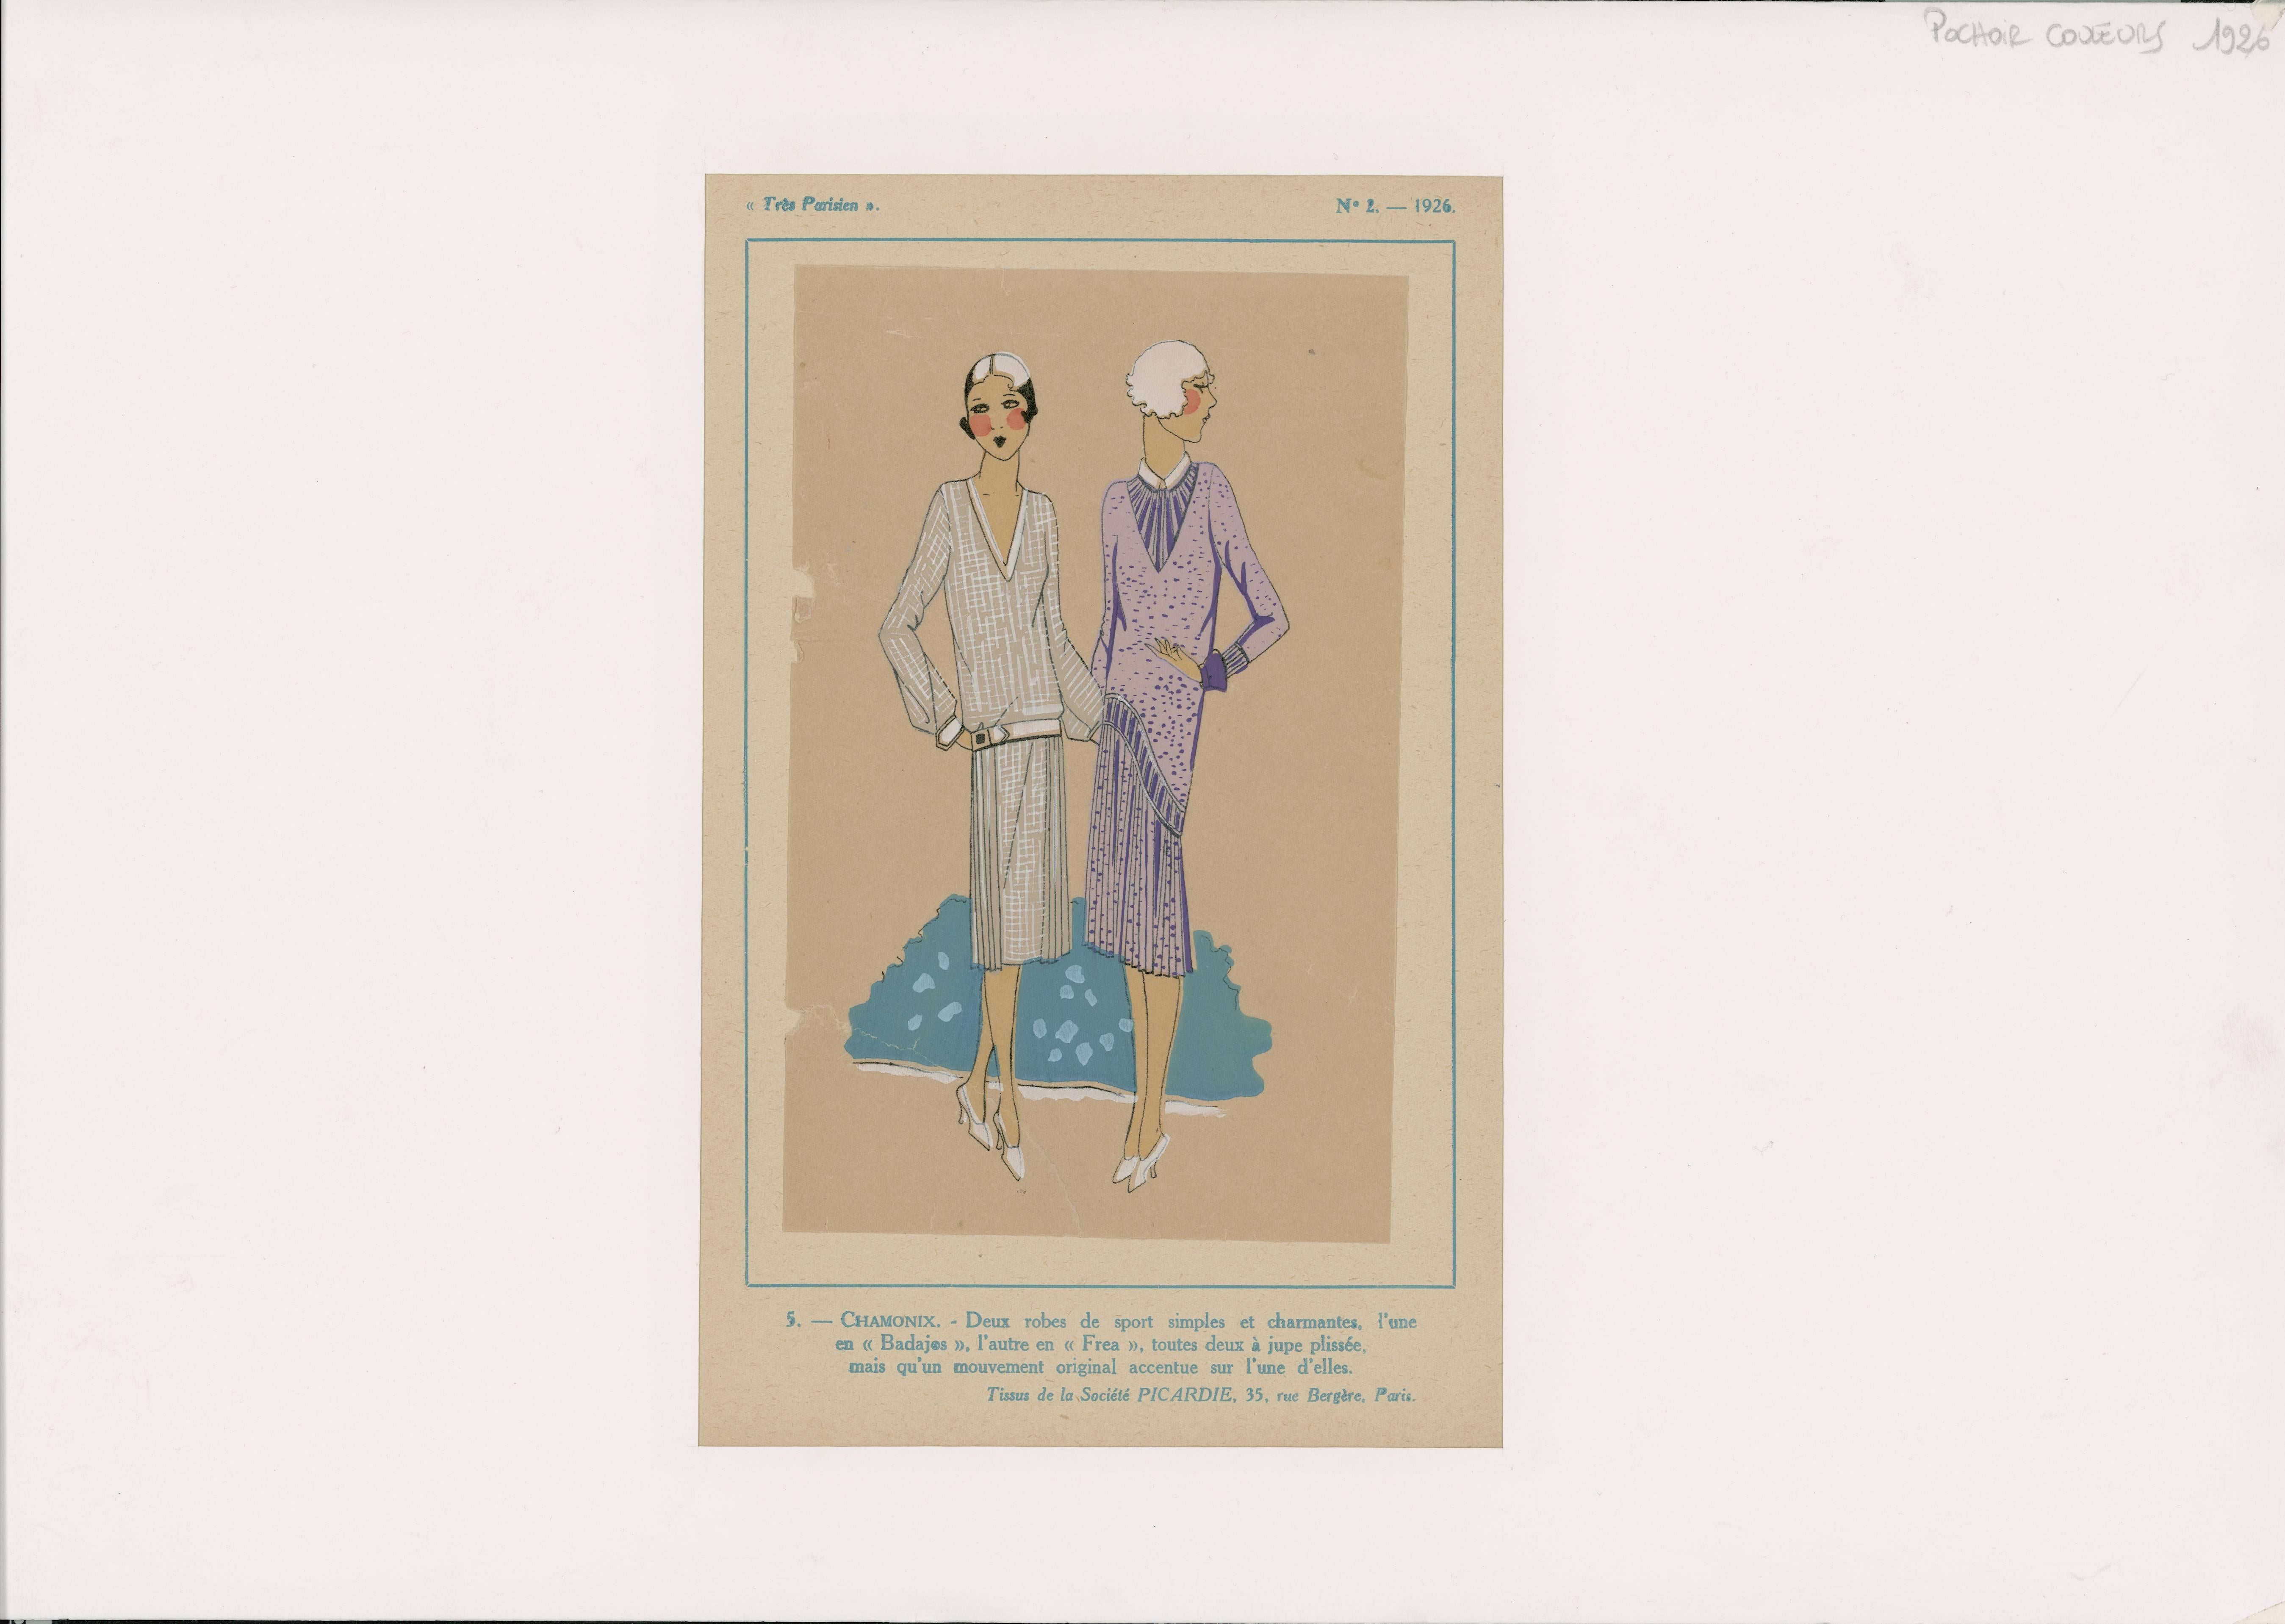 French color stencil fashion plates. Mounted to heavy board. Dated 1926. Drawn on paper. Possibly used for as selling tool in Parisian shops. They show signs of wear and are ready for framing.

Not available for sale or to ship in the state of